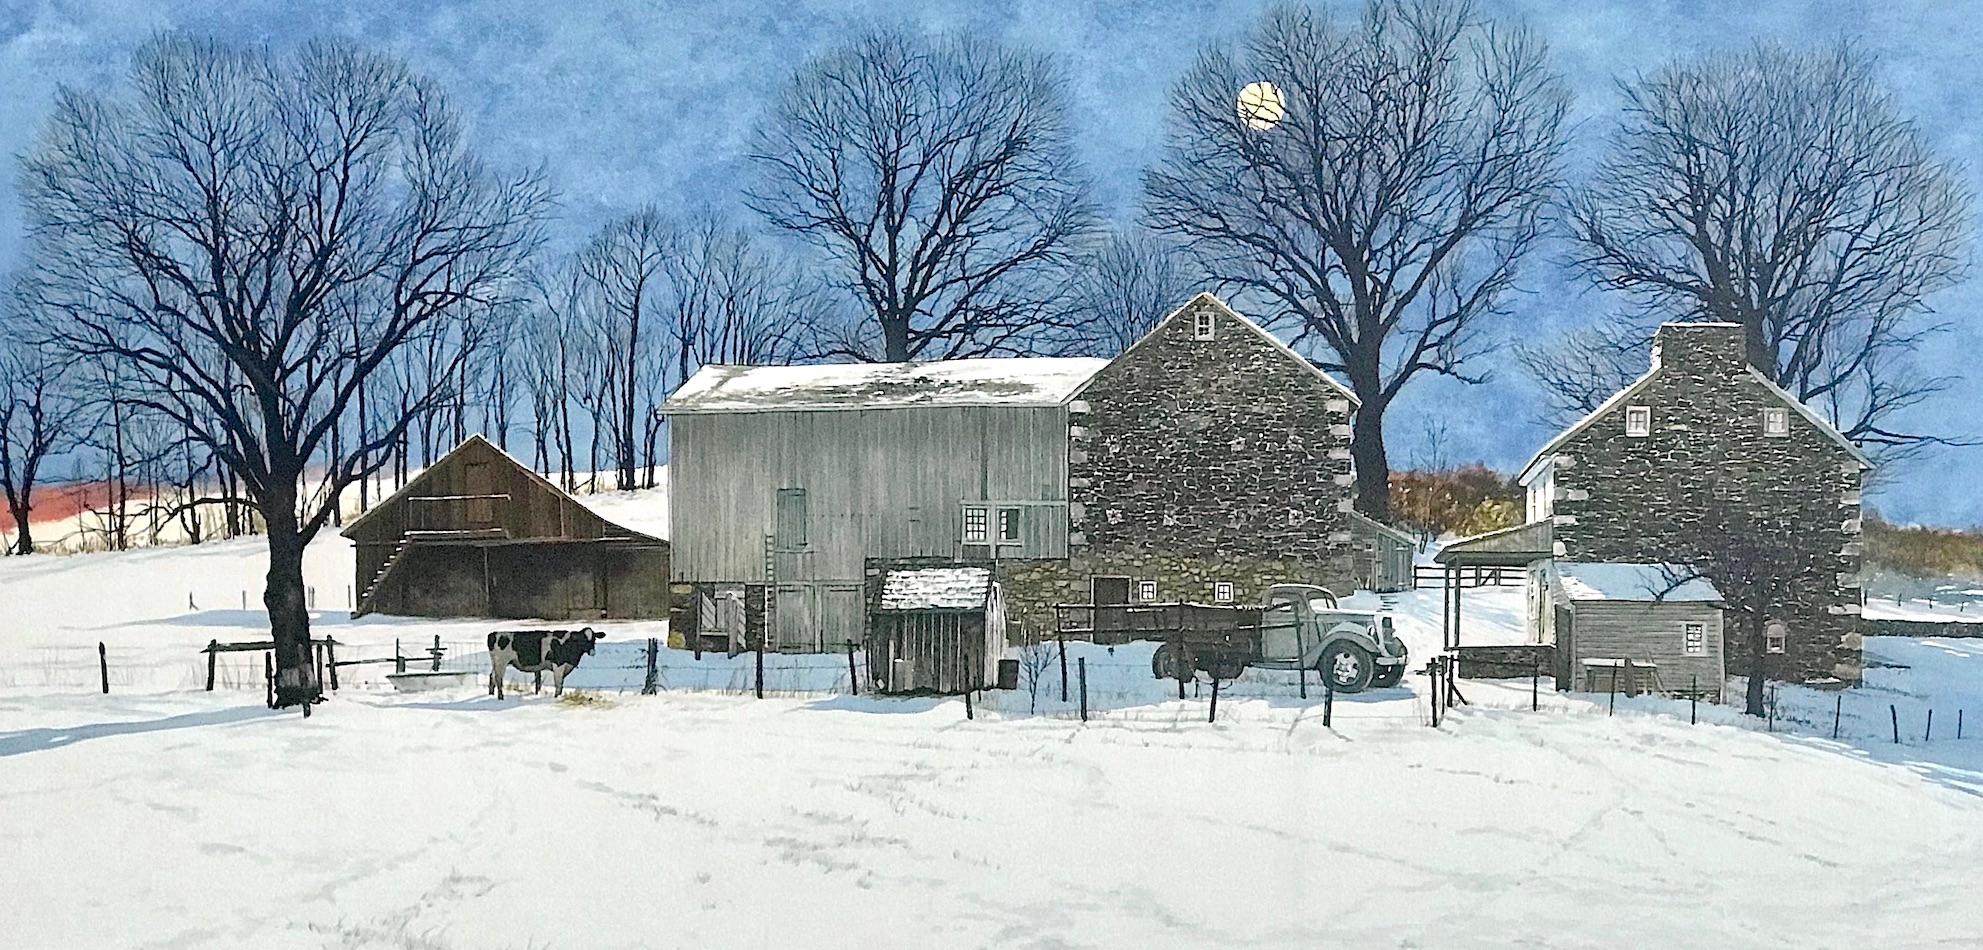 DOMINO Signed Lithograph, Bucks County Landscape, Historic Stone Farmhouse, Cow - Realist Print by Peter Sculthorpe